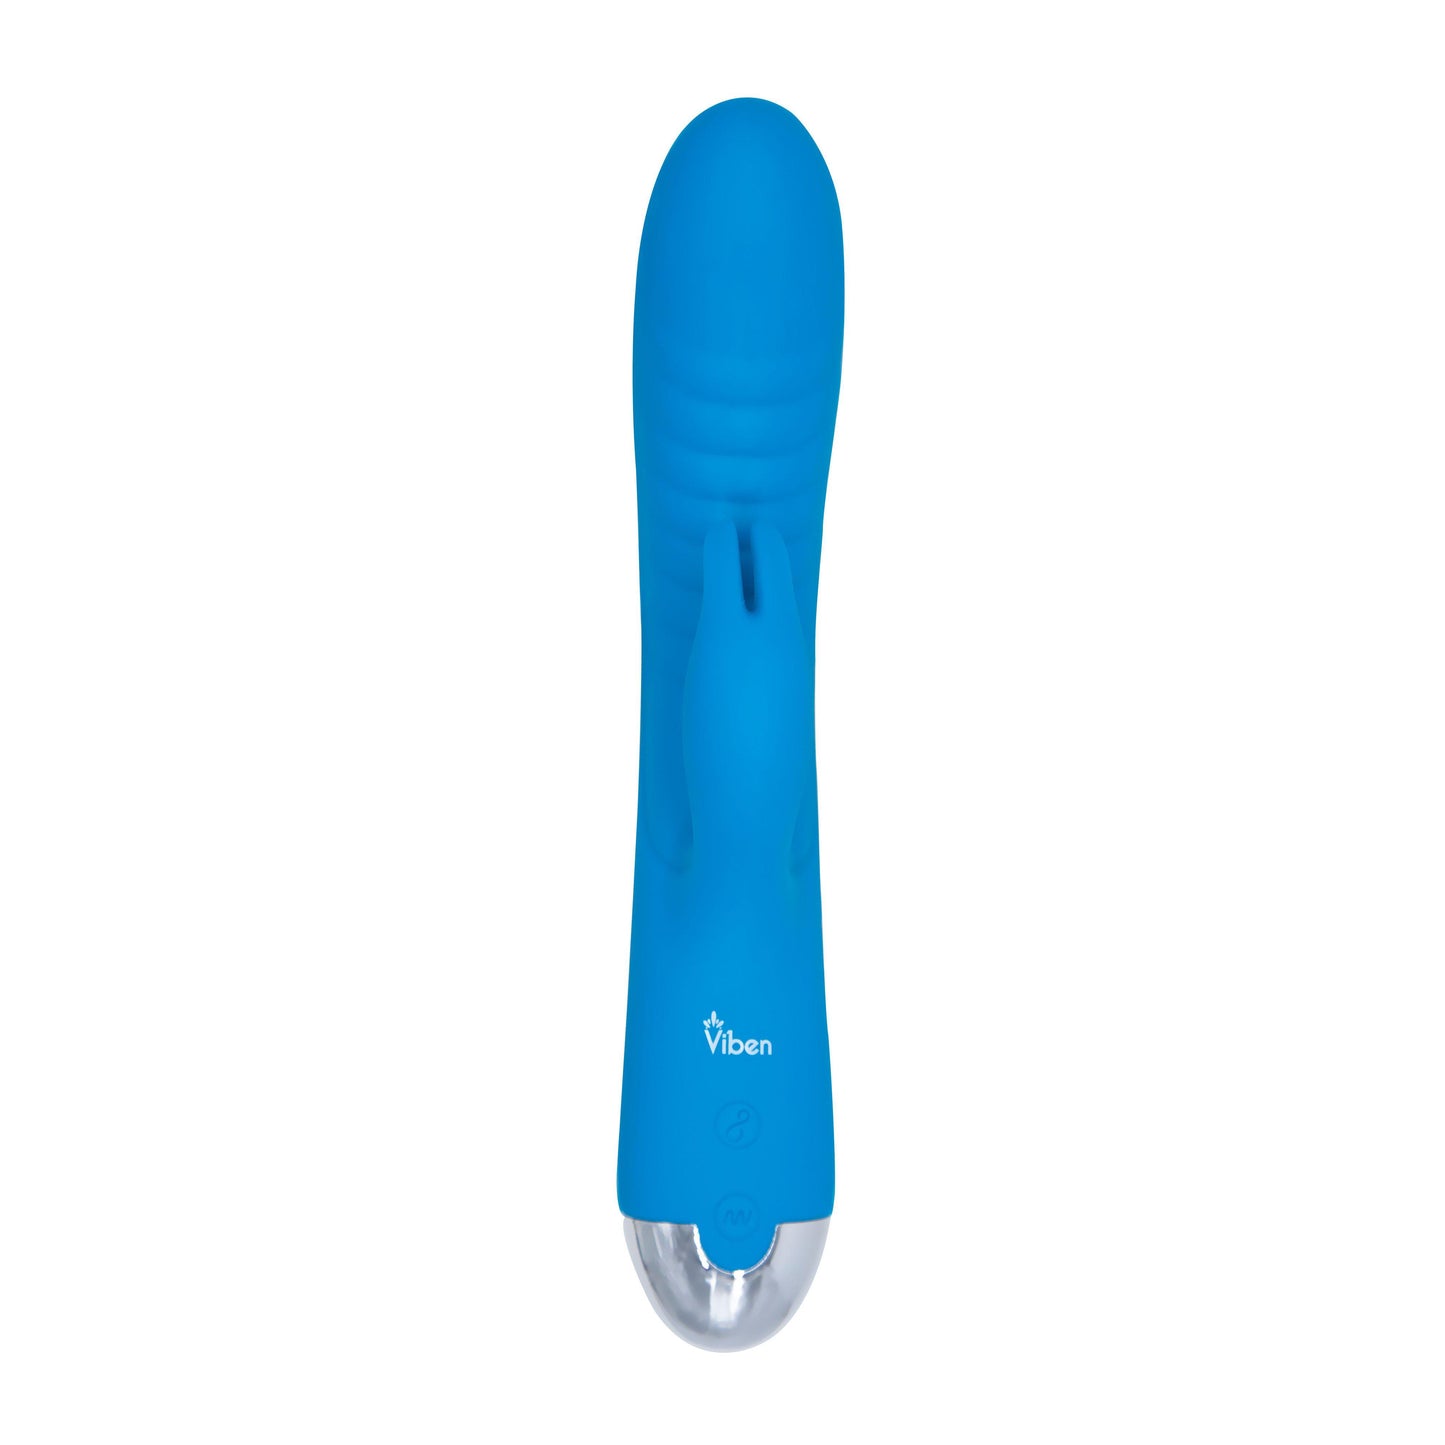 Alluring - Come Hither G-Spot Rabbit - Ocean VB-66105